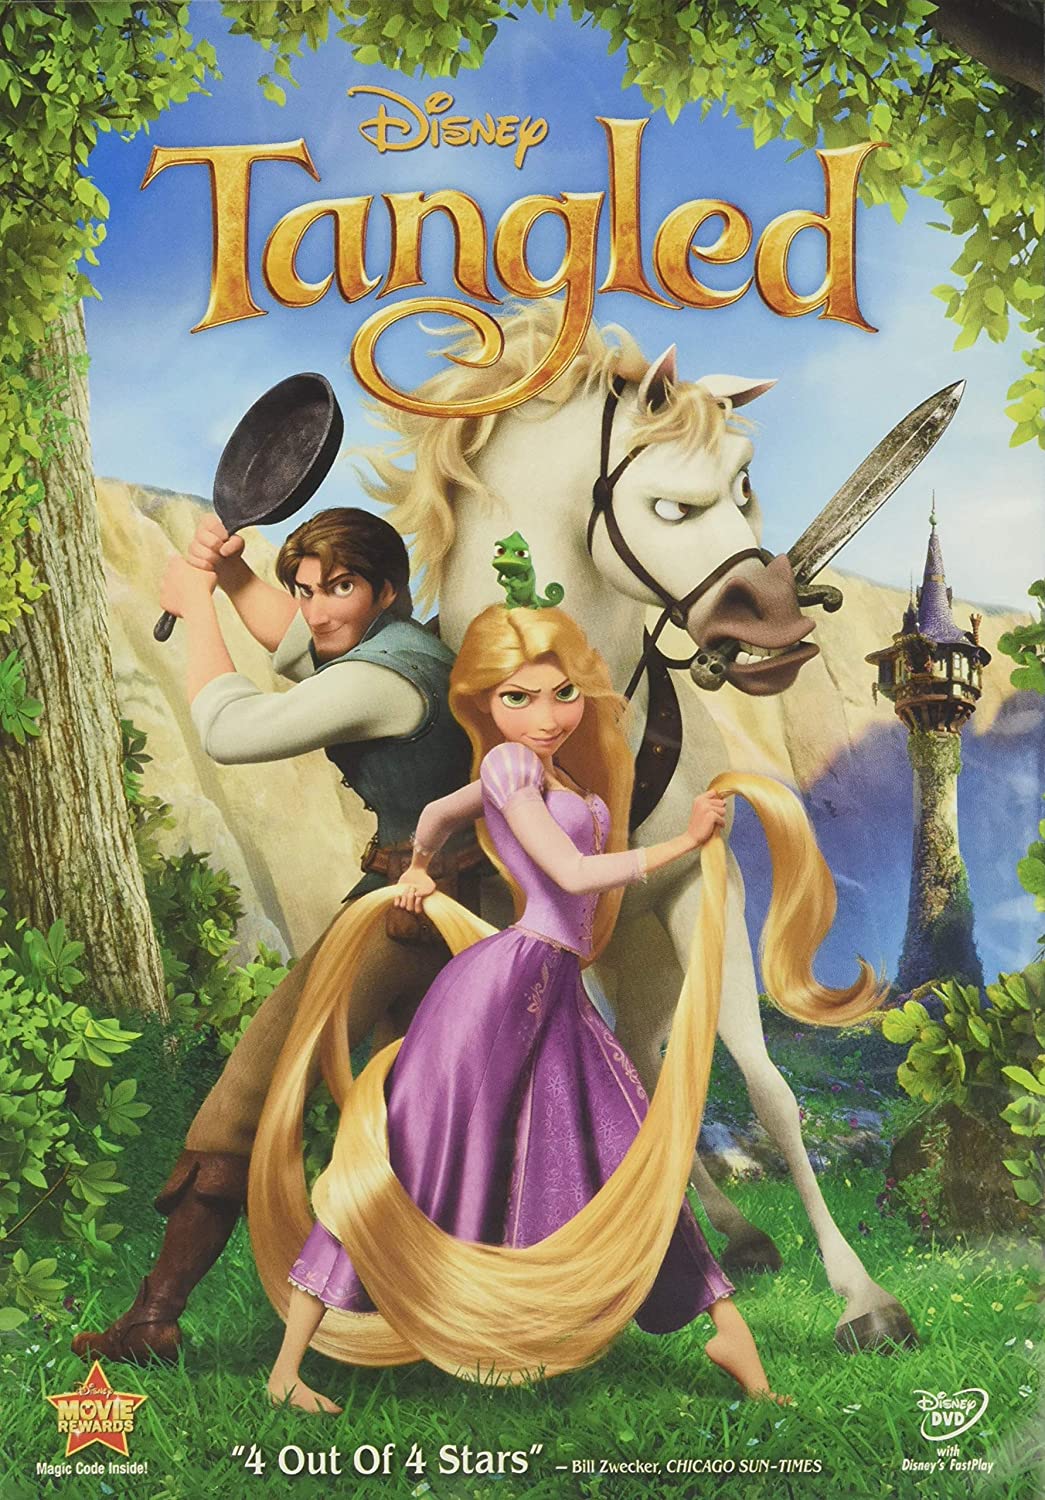 Tangled (DVD) - PG (Parental Guidance Suggested)